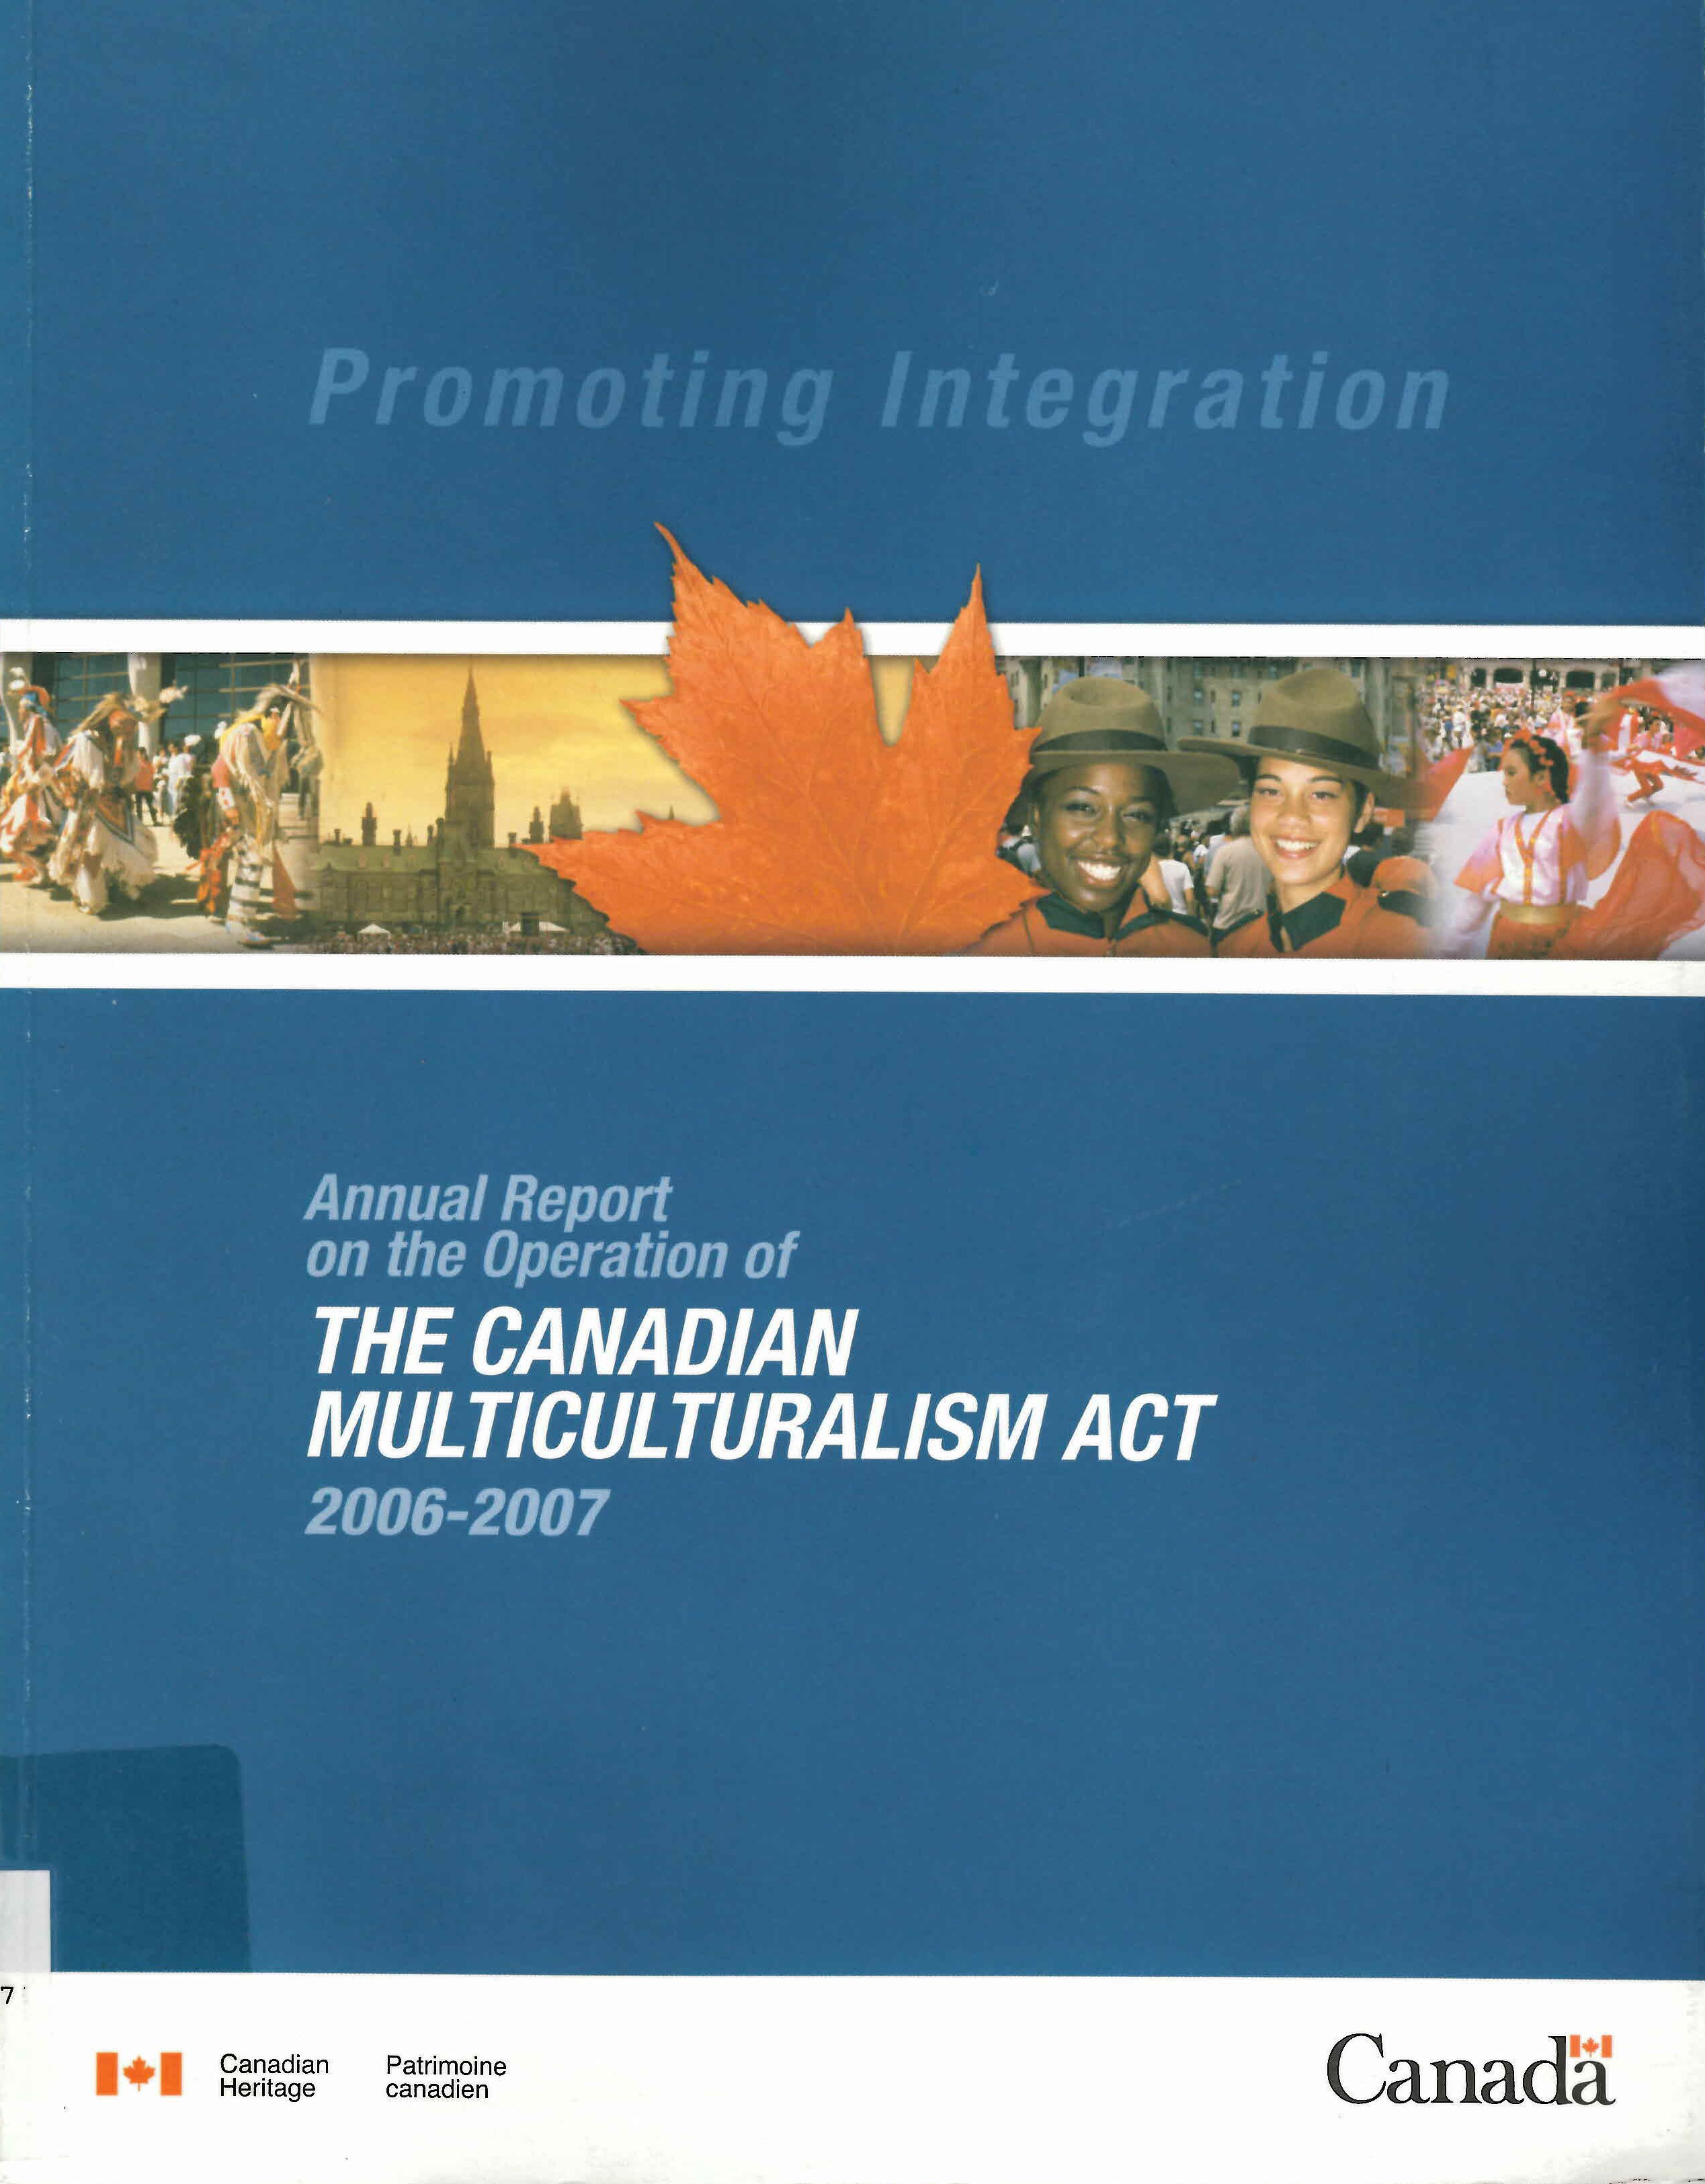 Annual report on the operation of the Canadian Multiculturalism Act.